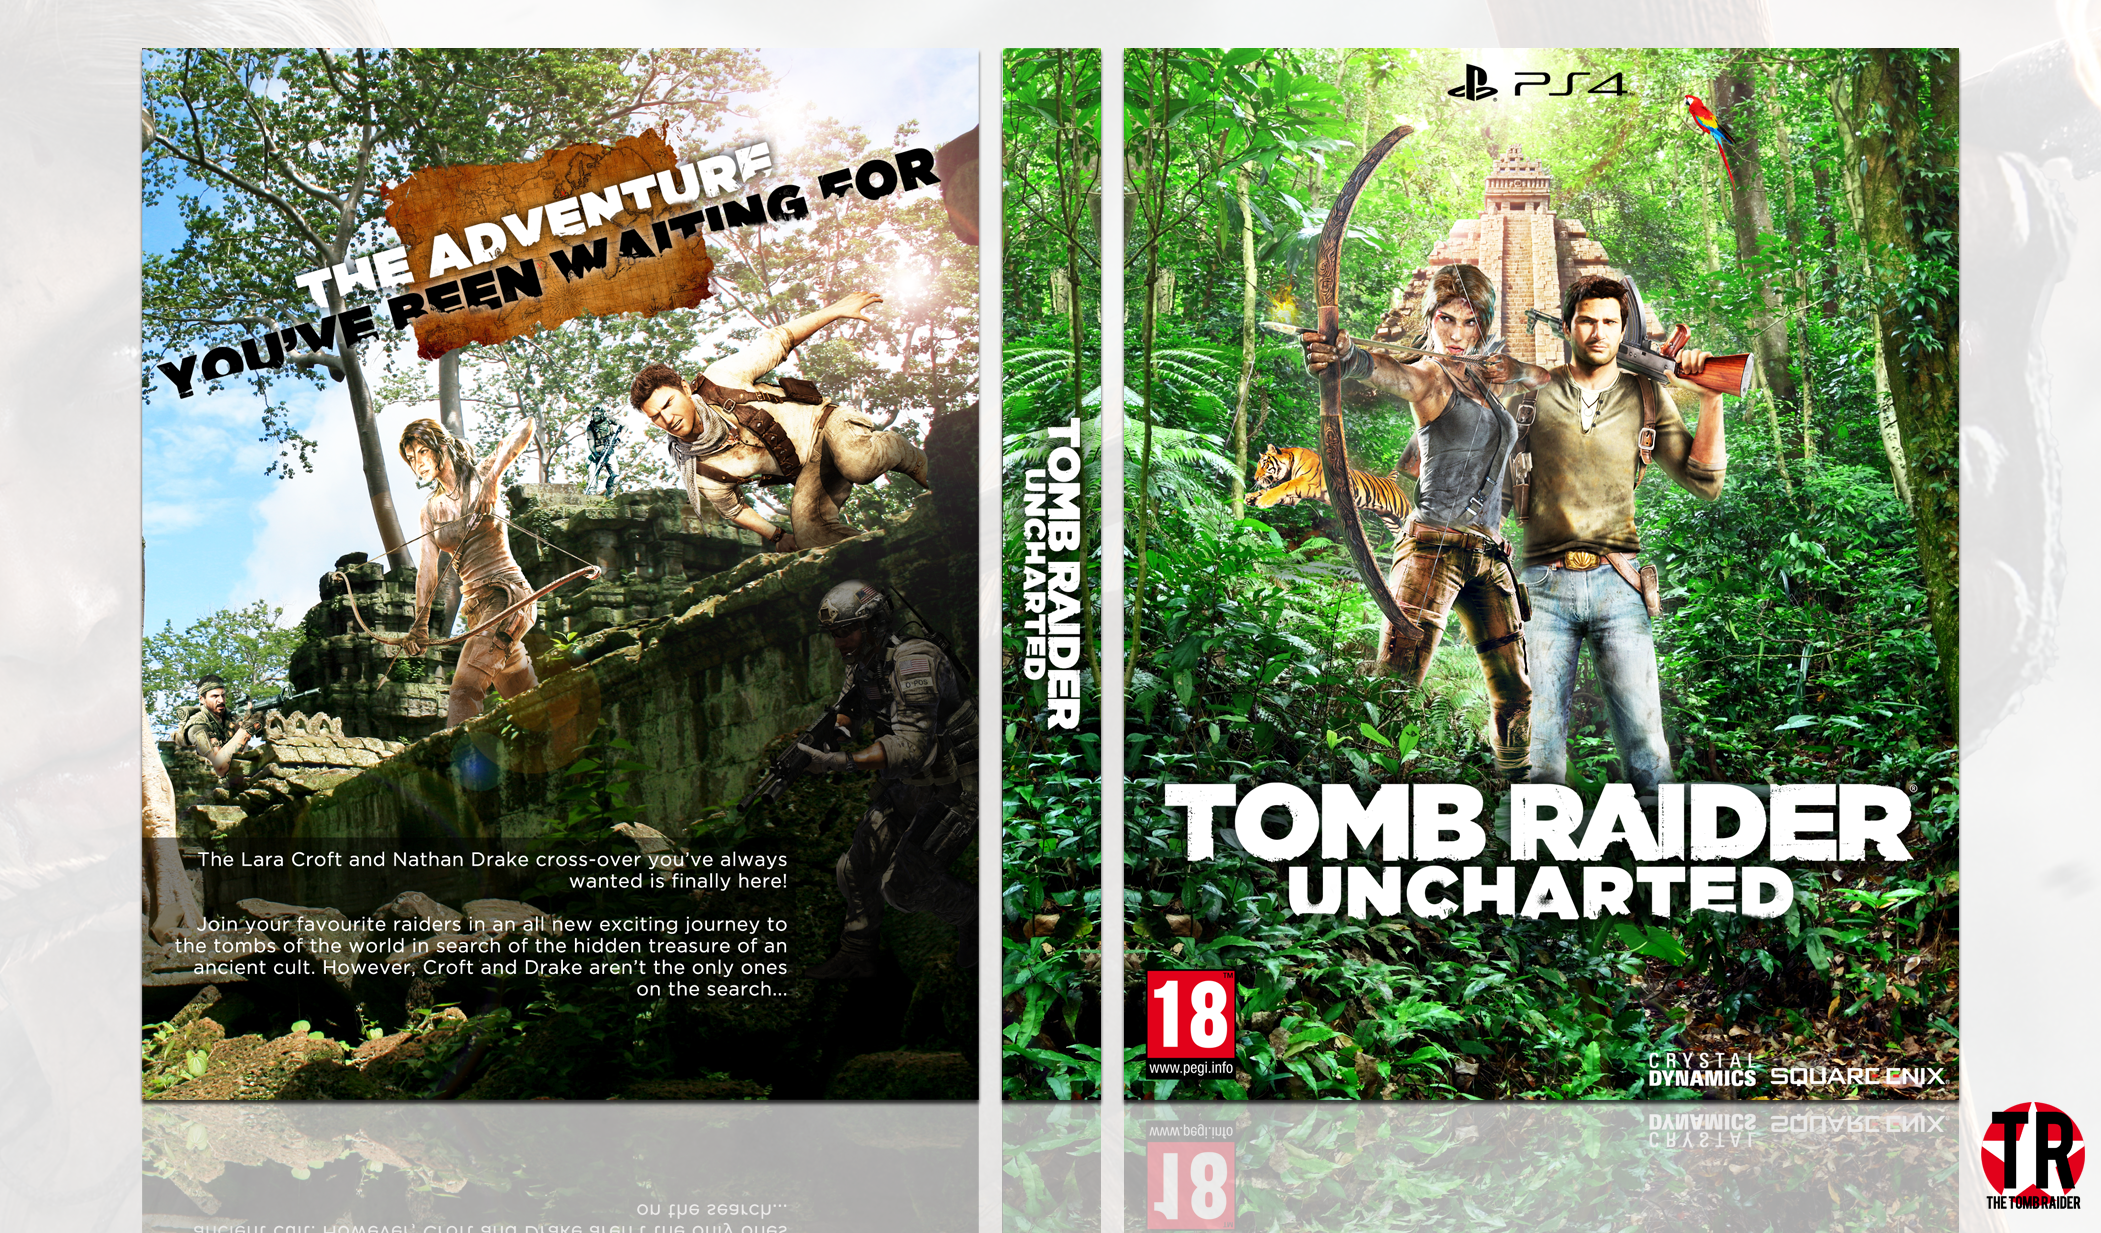 Tomb Raider: Uncharted box cover